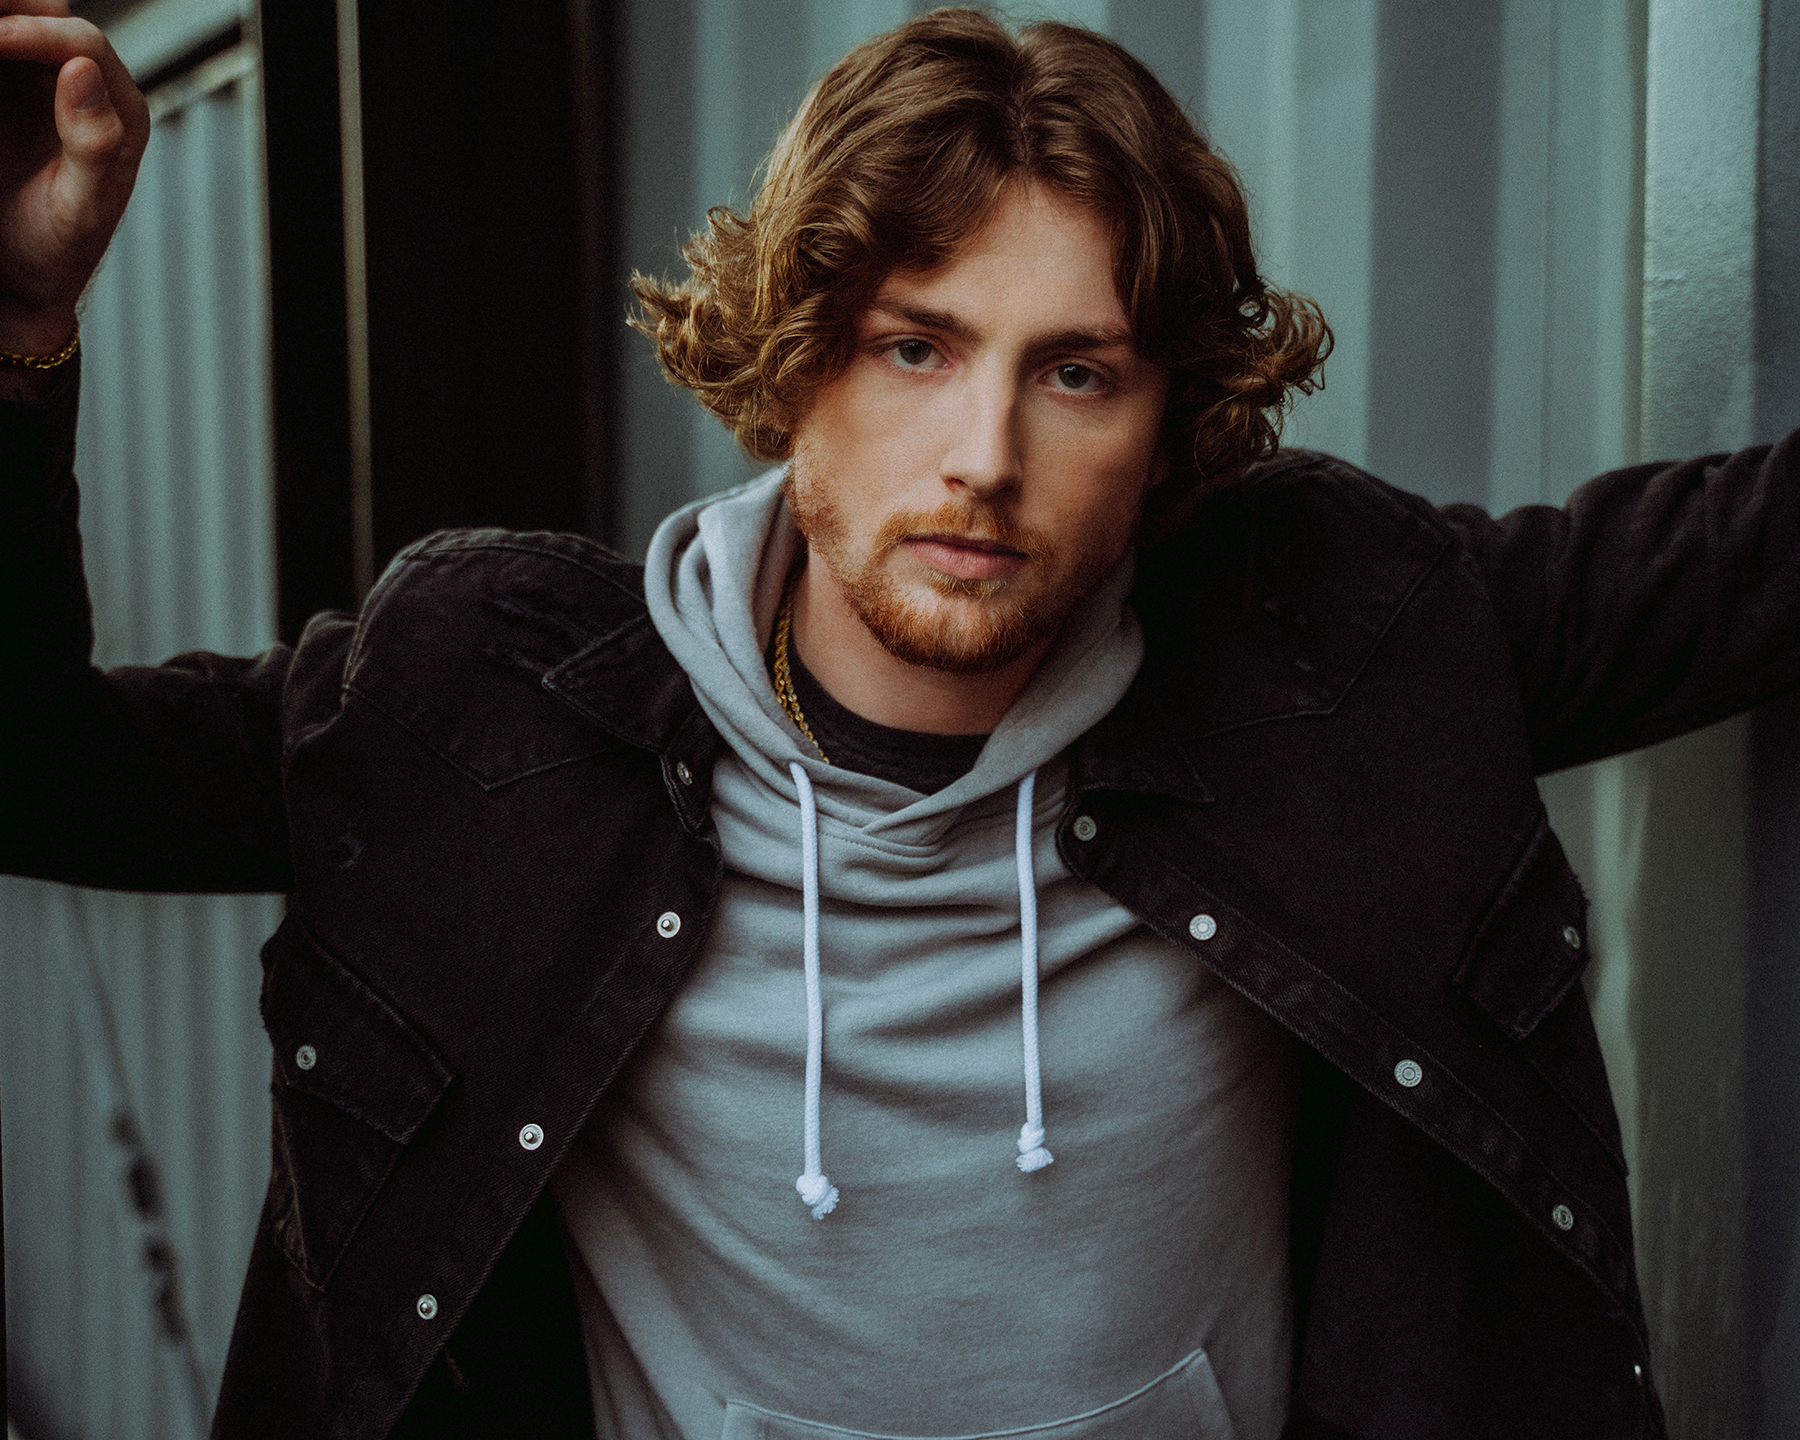 BAILEY ZIMMERMAN DEBUTS ATOP MULTIPLE CHARTS WITH RELEASE OF “ROCK AND A HARD PLACE”